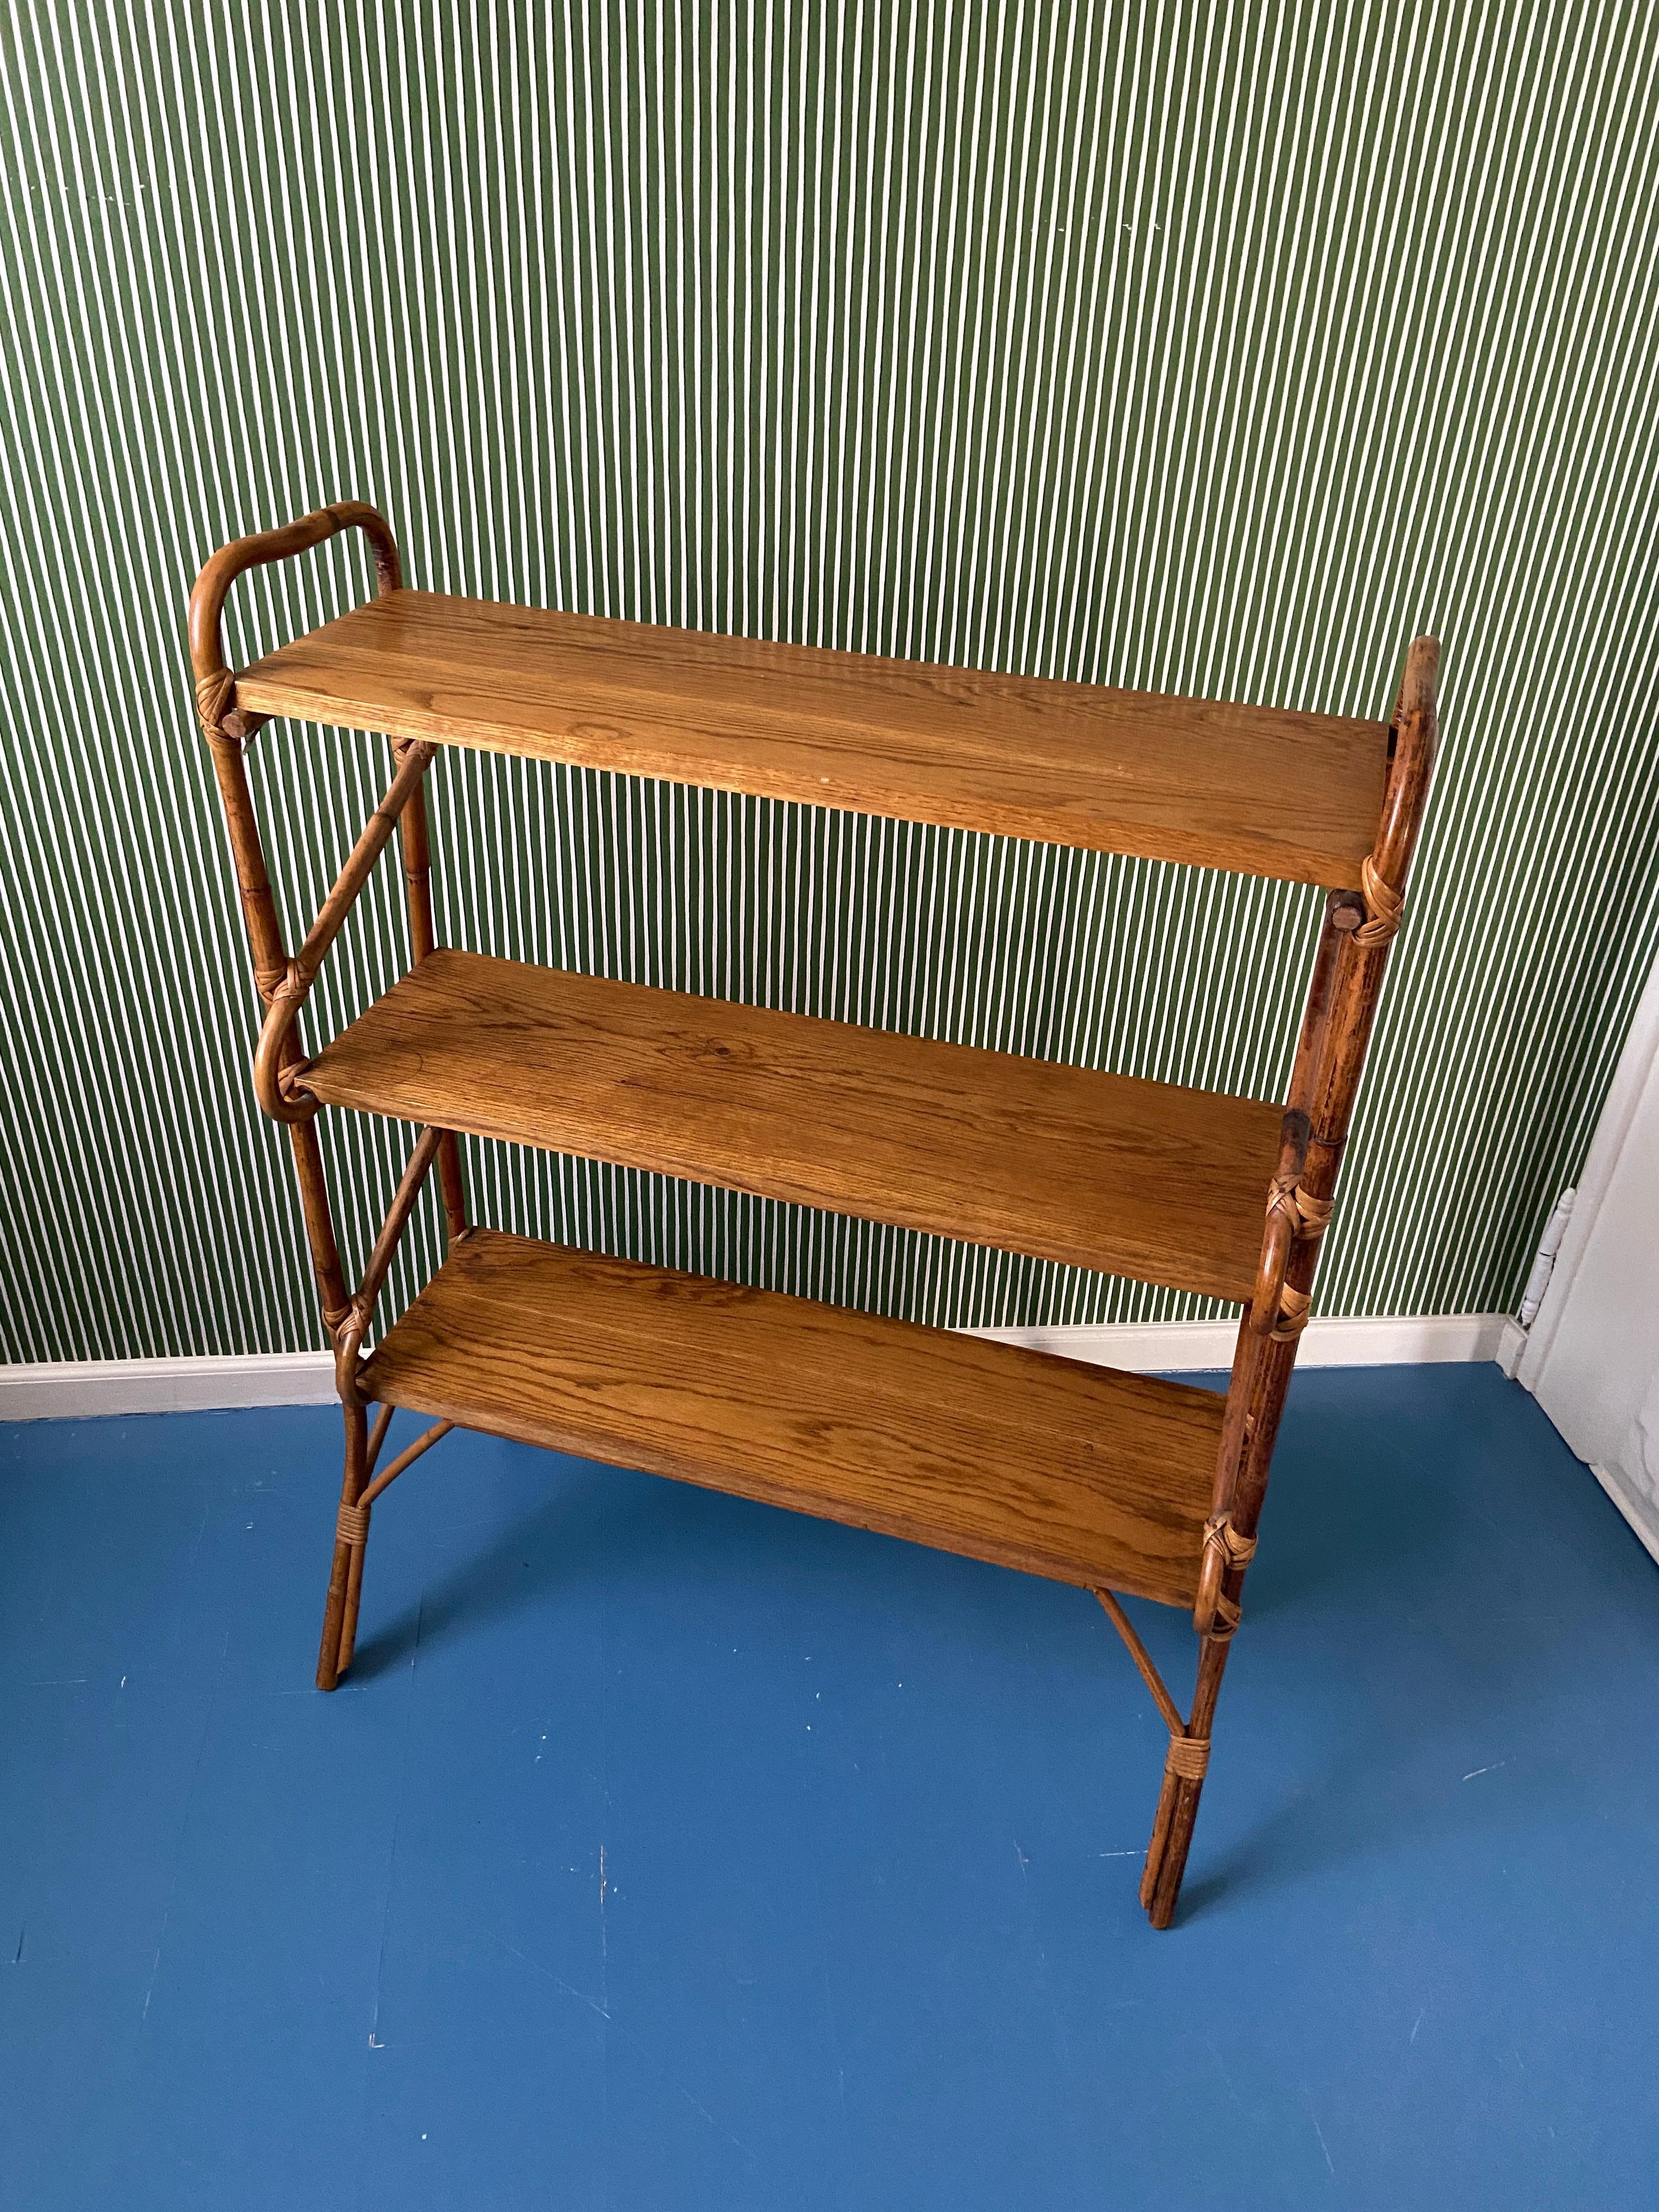 France, 1960's

Bamboo and wooden shelf.

Measures: H 110 x W 84 x D 30 cm.